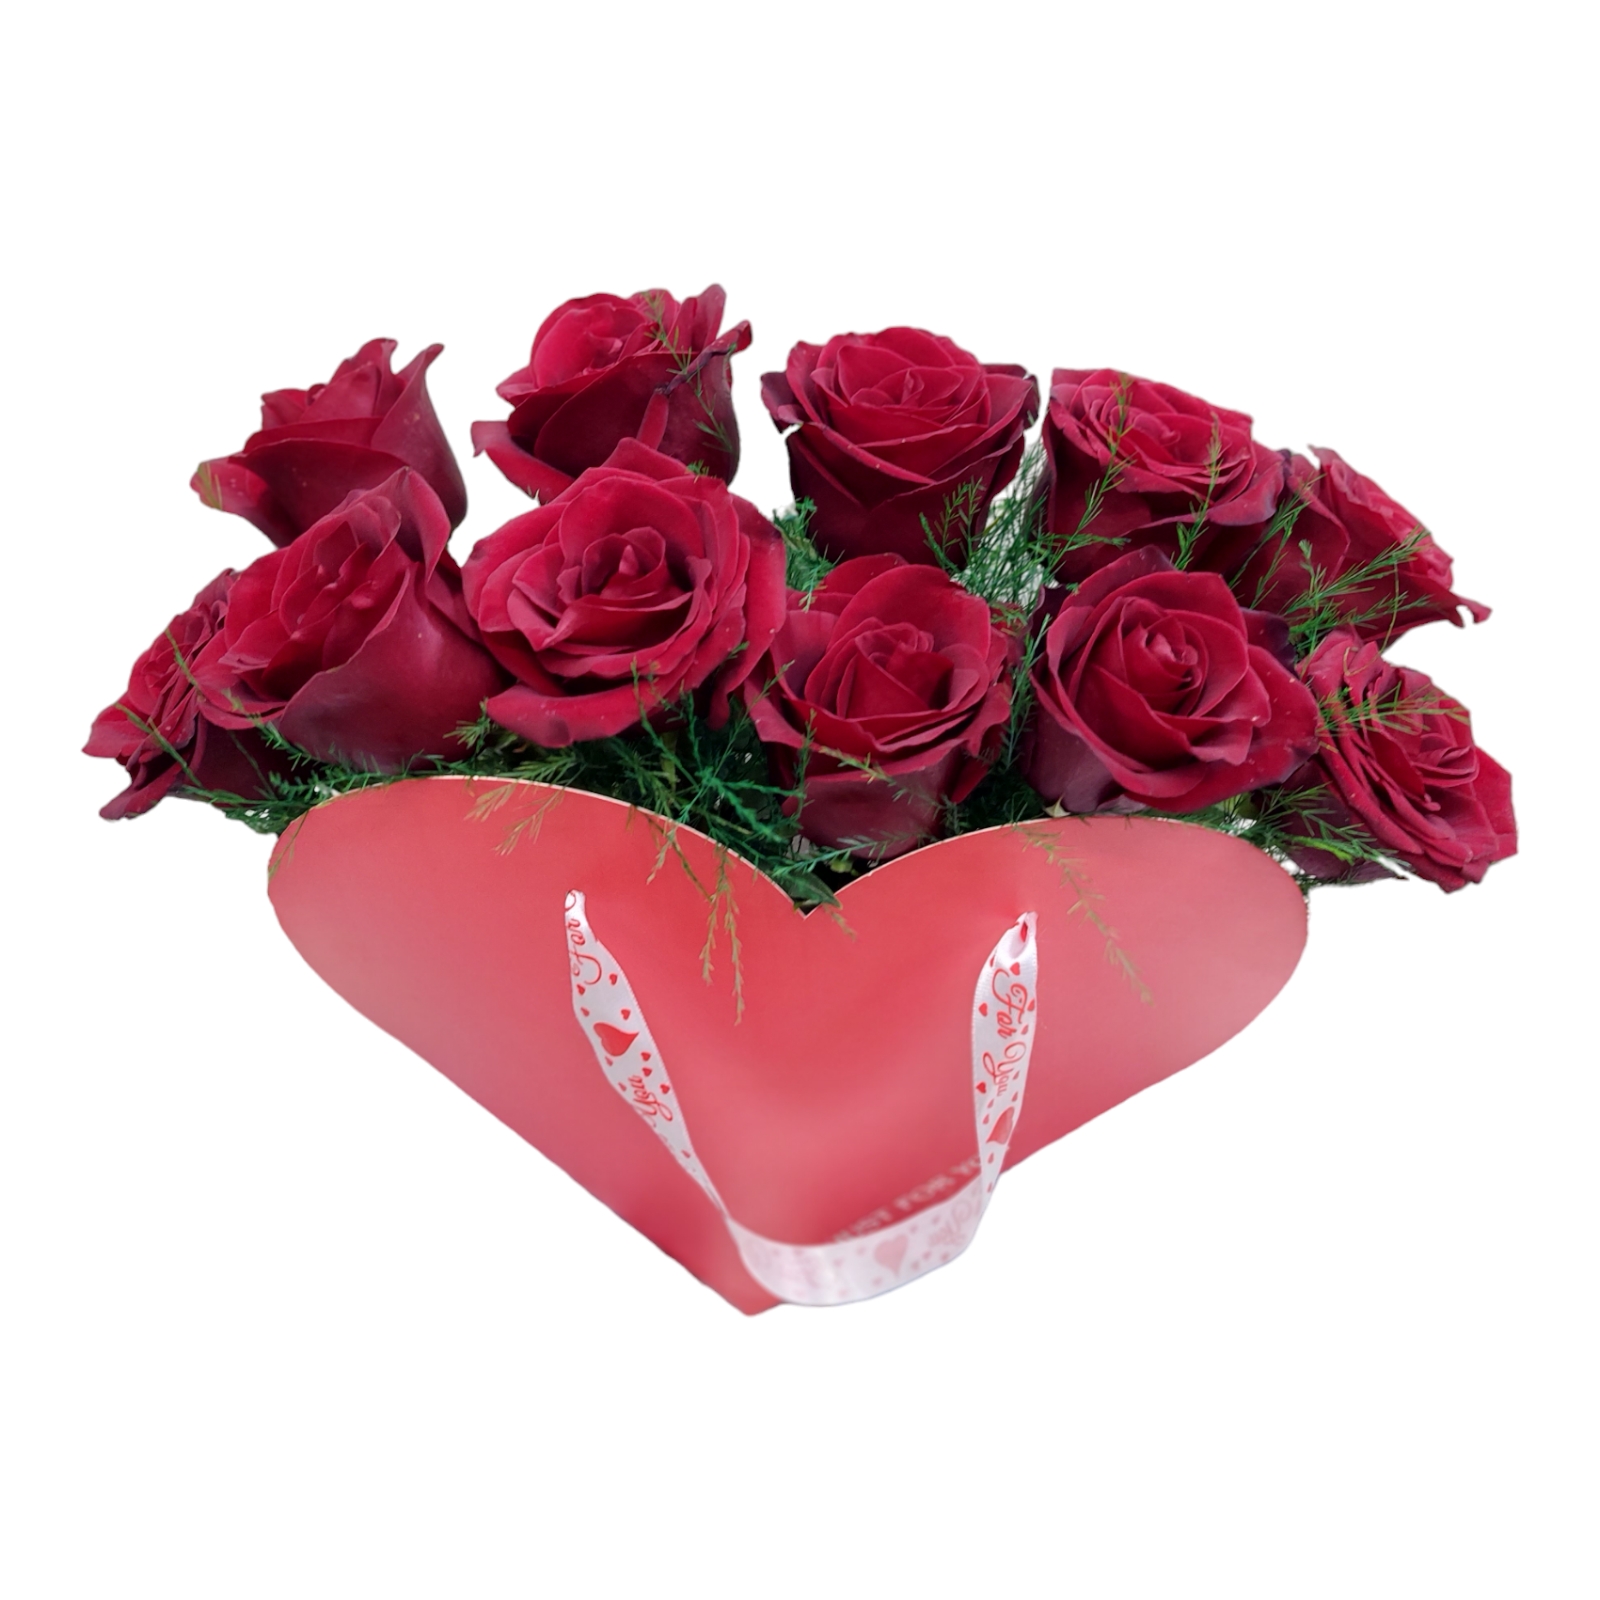 Red%20Roses%20in%20a%20Red%20Heart%20Flower%20Bag